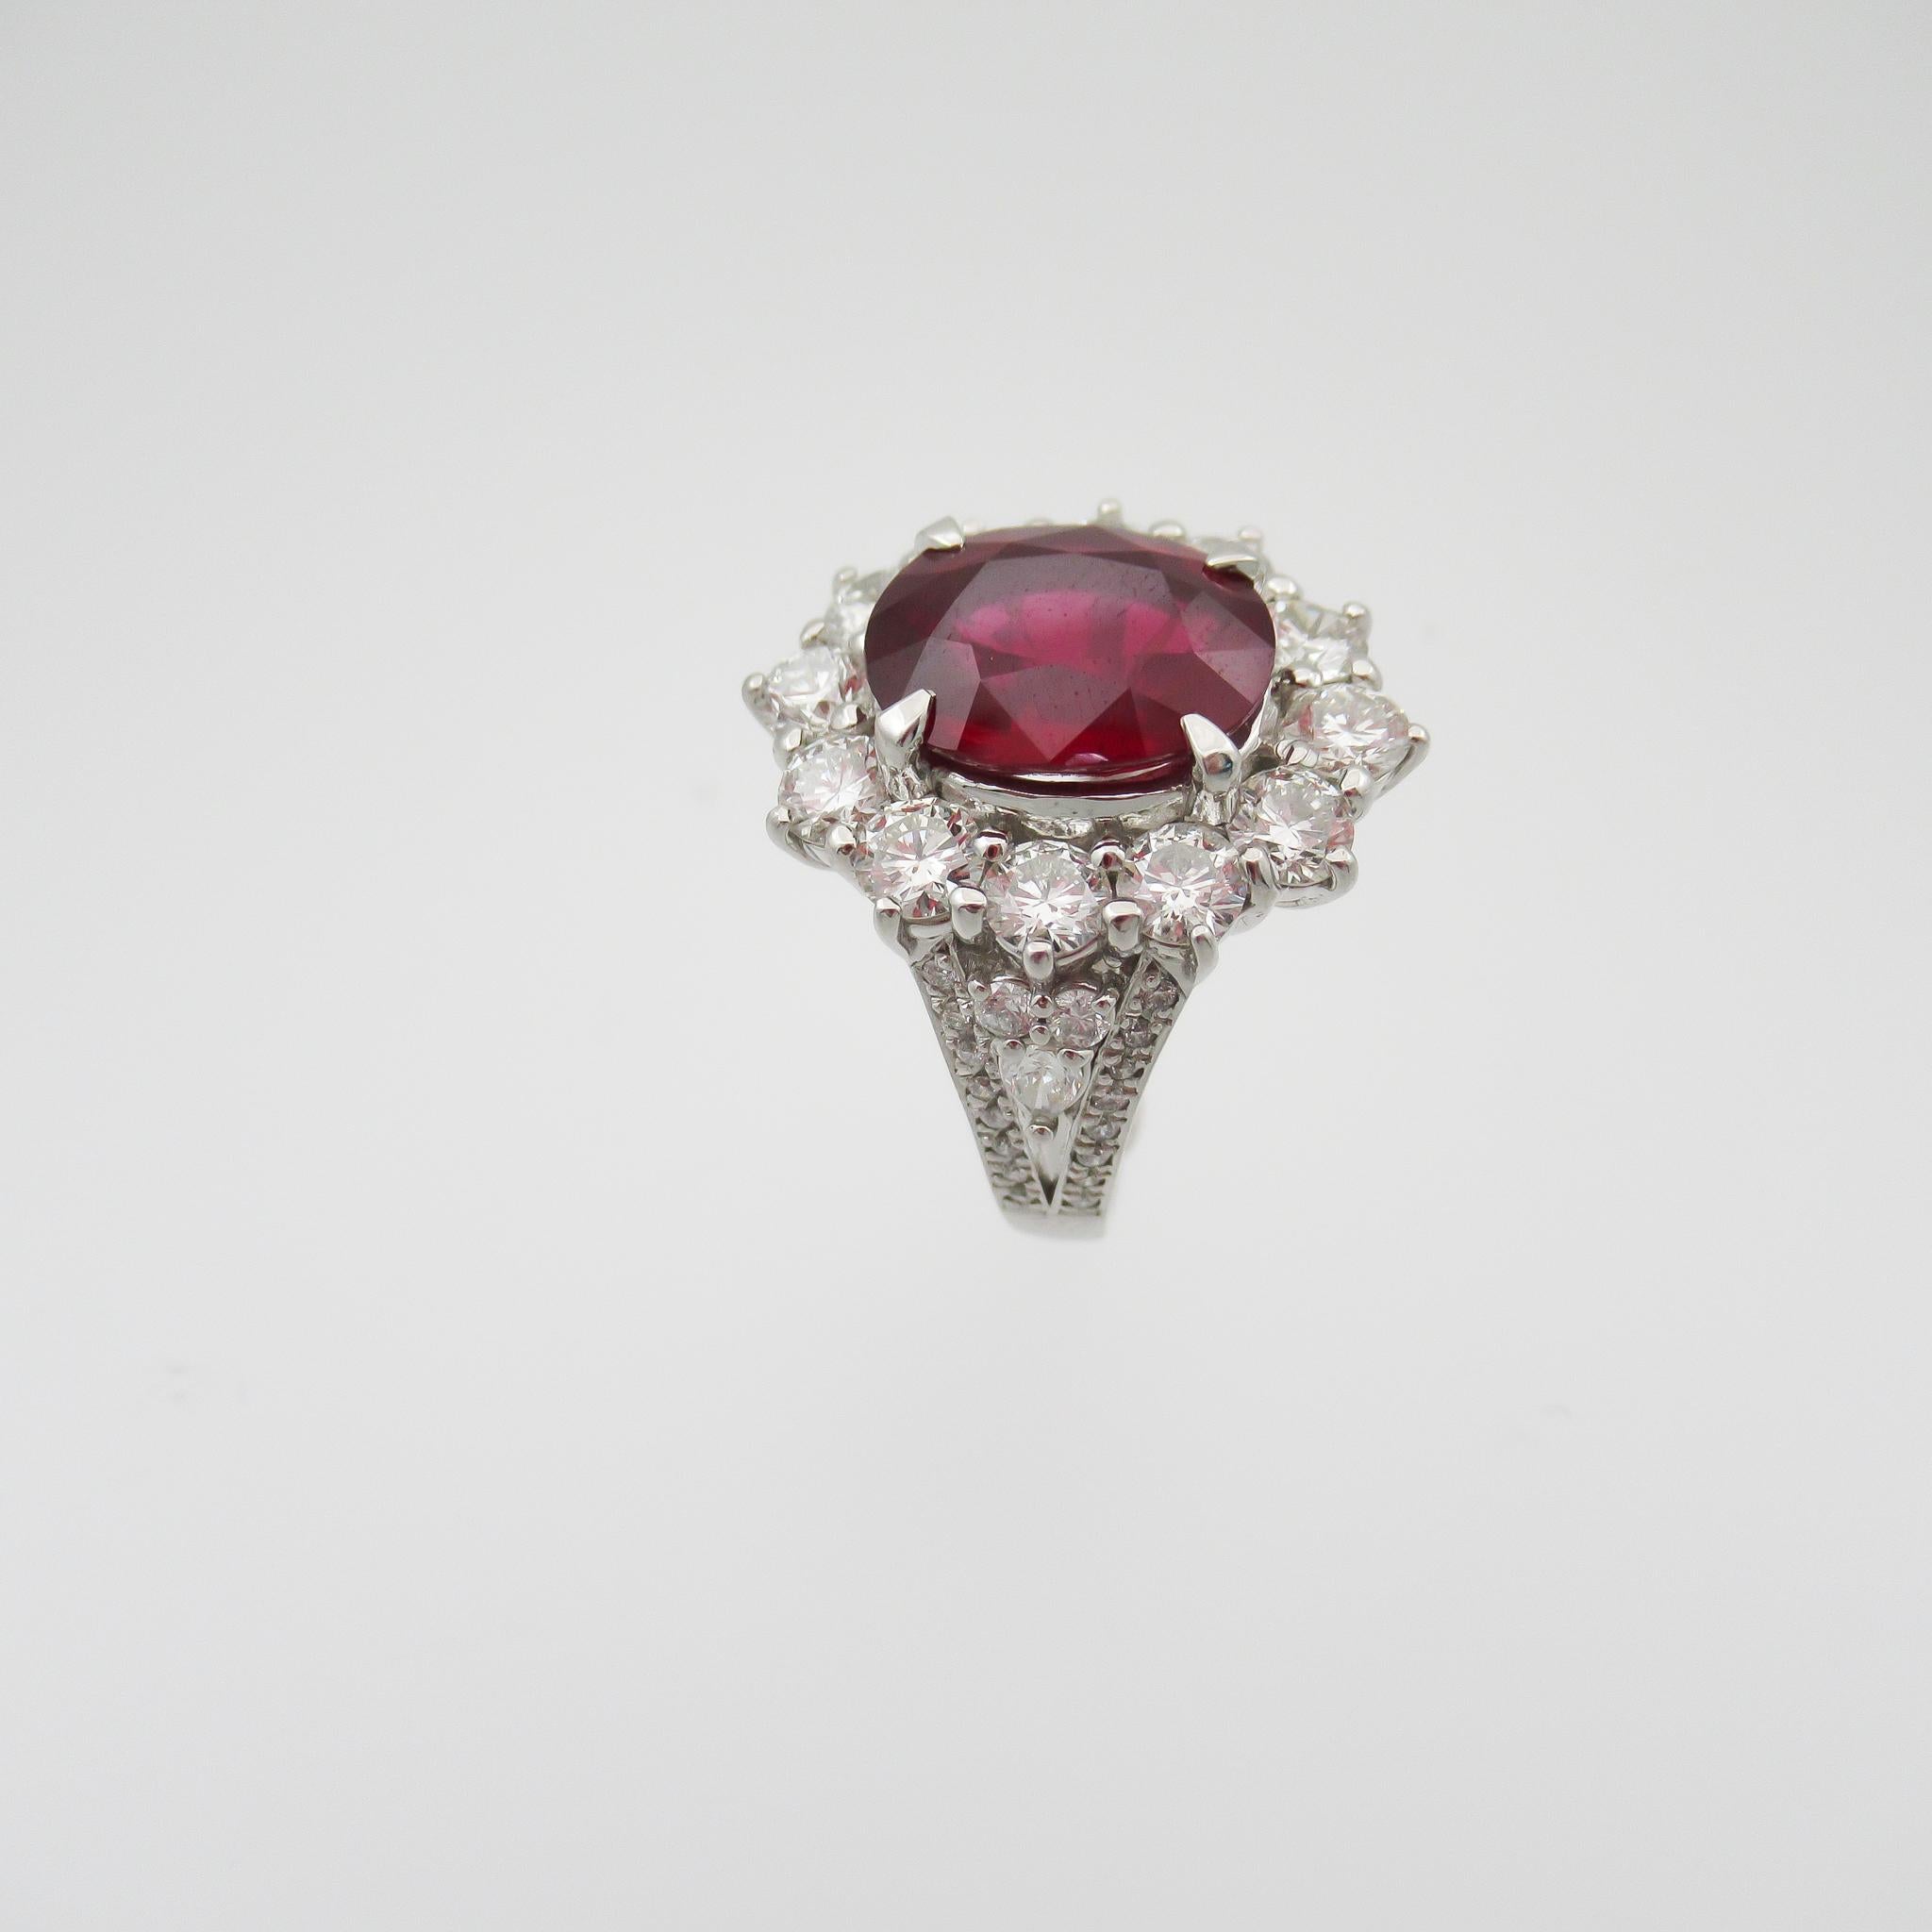 Oval Cut GRS Certified 5.24 Carat Unheated Pigeon Blood Ruby Ring with Diamonds